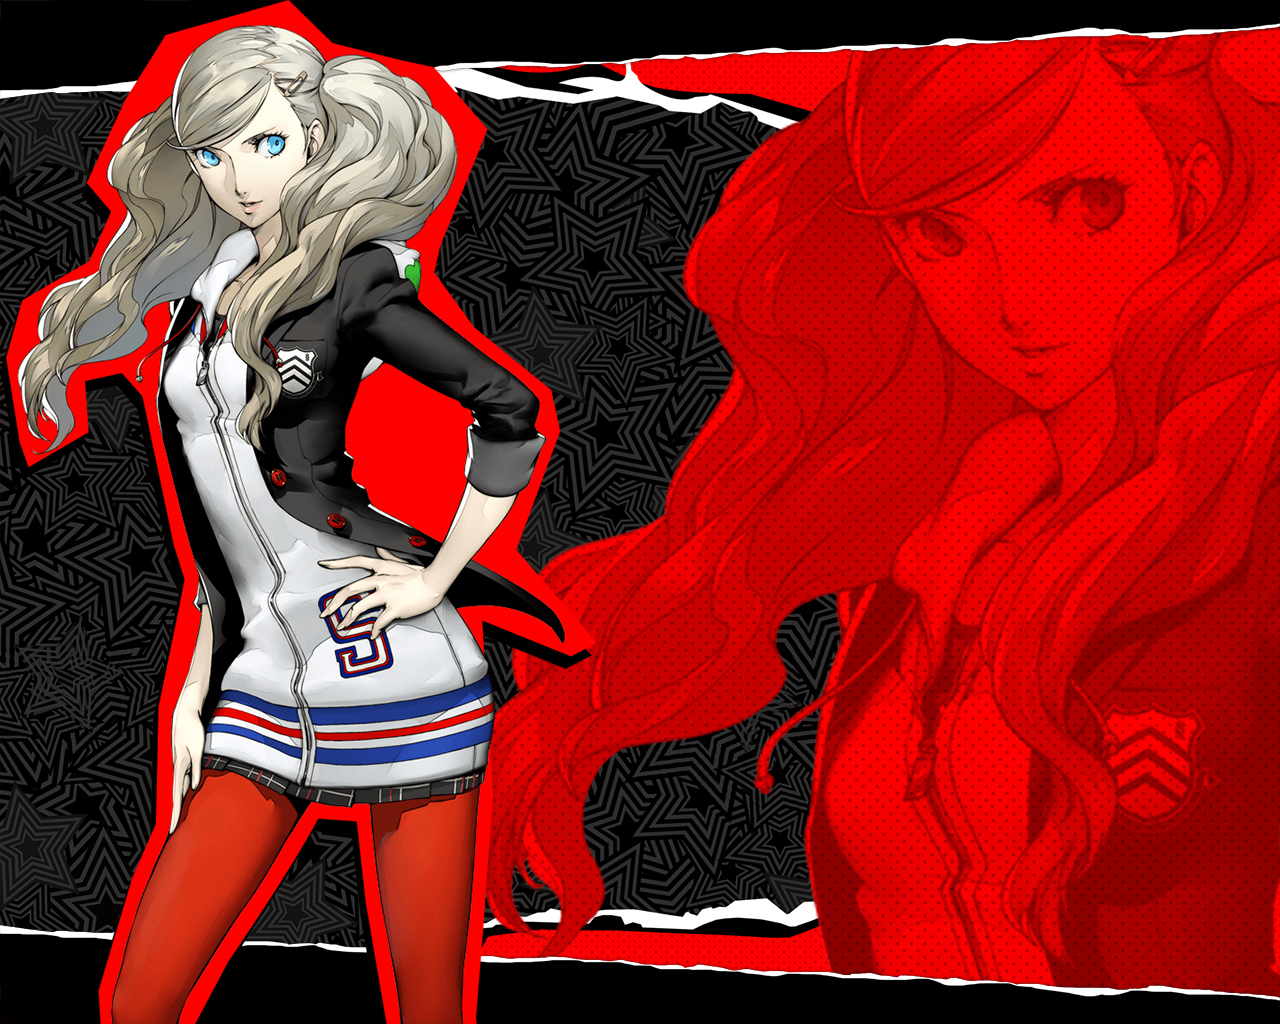 Rumor: Persona 5: The Phantom X Could Release Outside of China, But There's  a Catch